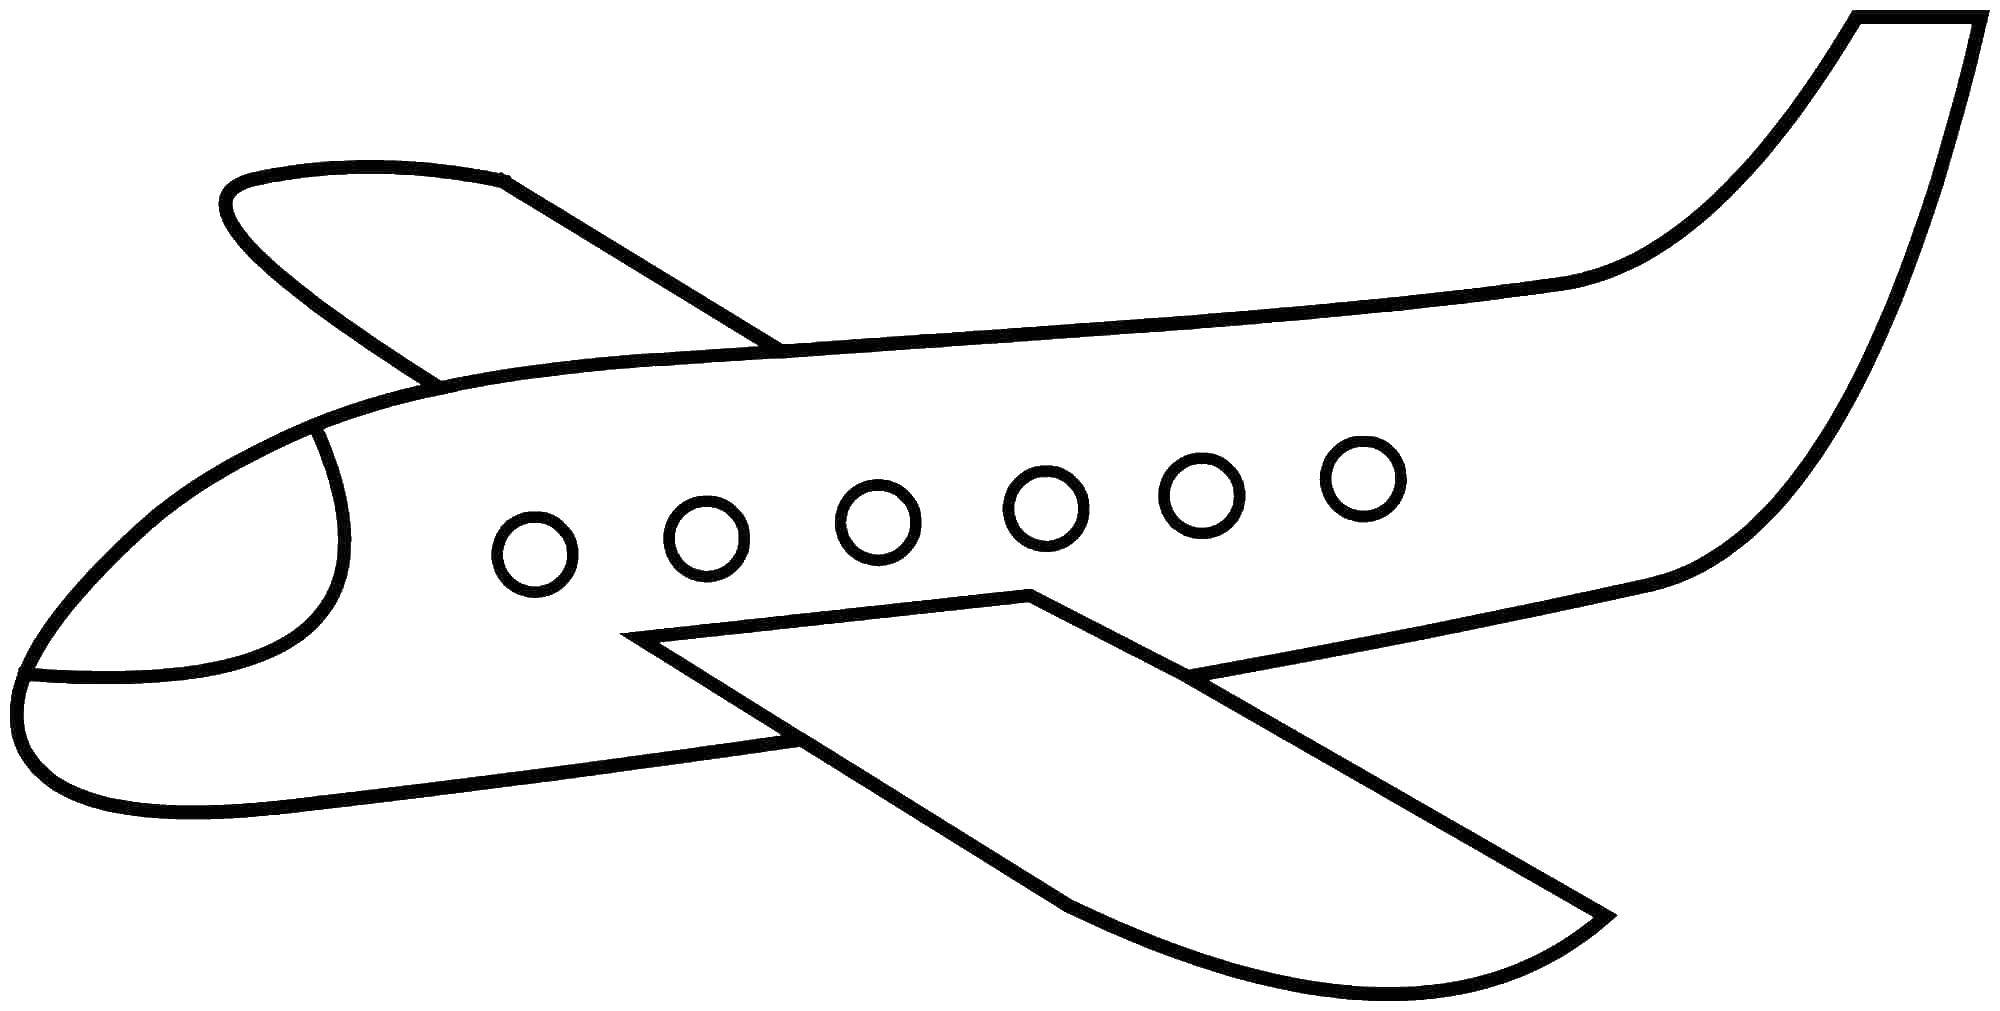 Coloring The outline of the plane. Category The planes. Tags:  airplane wing, window.